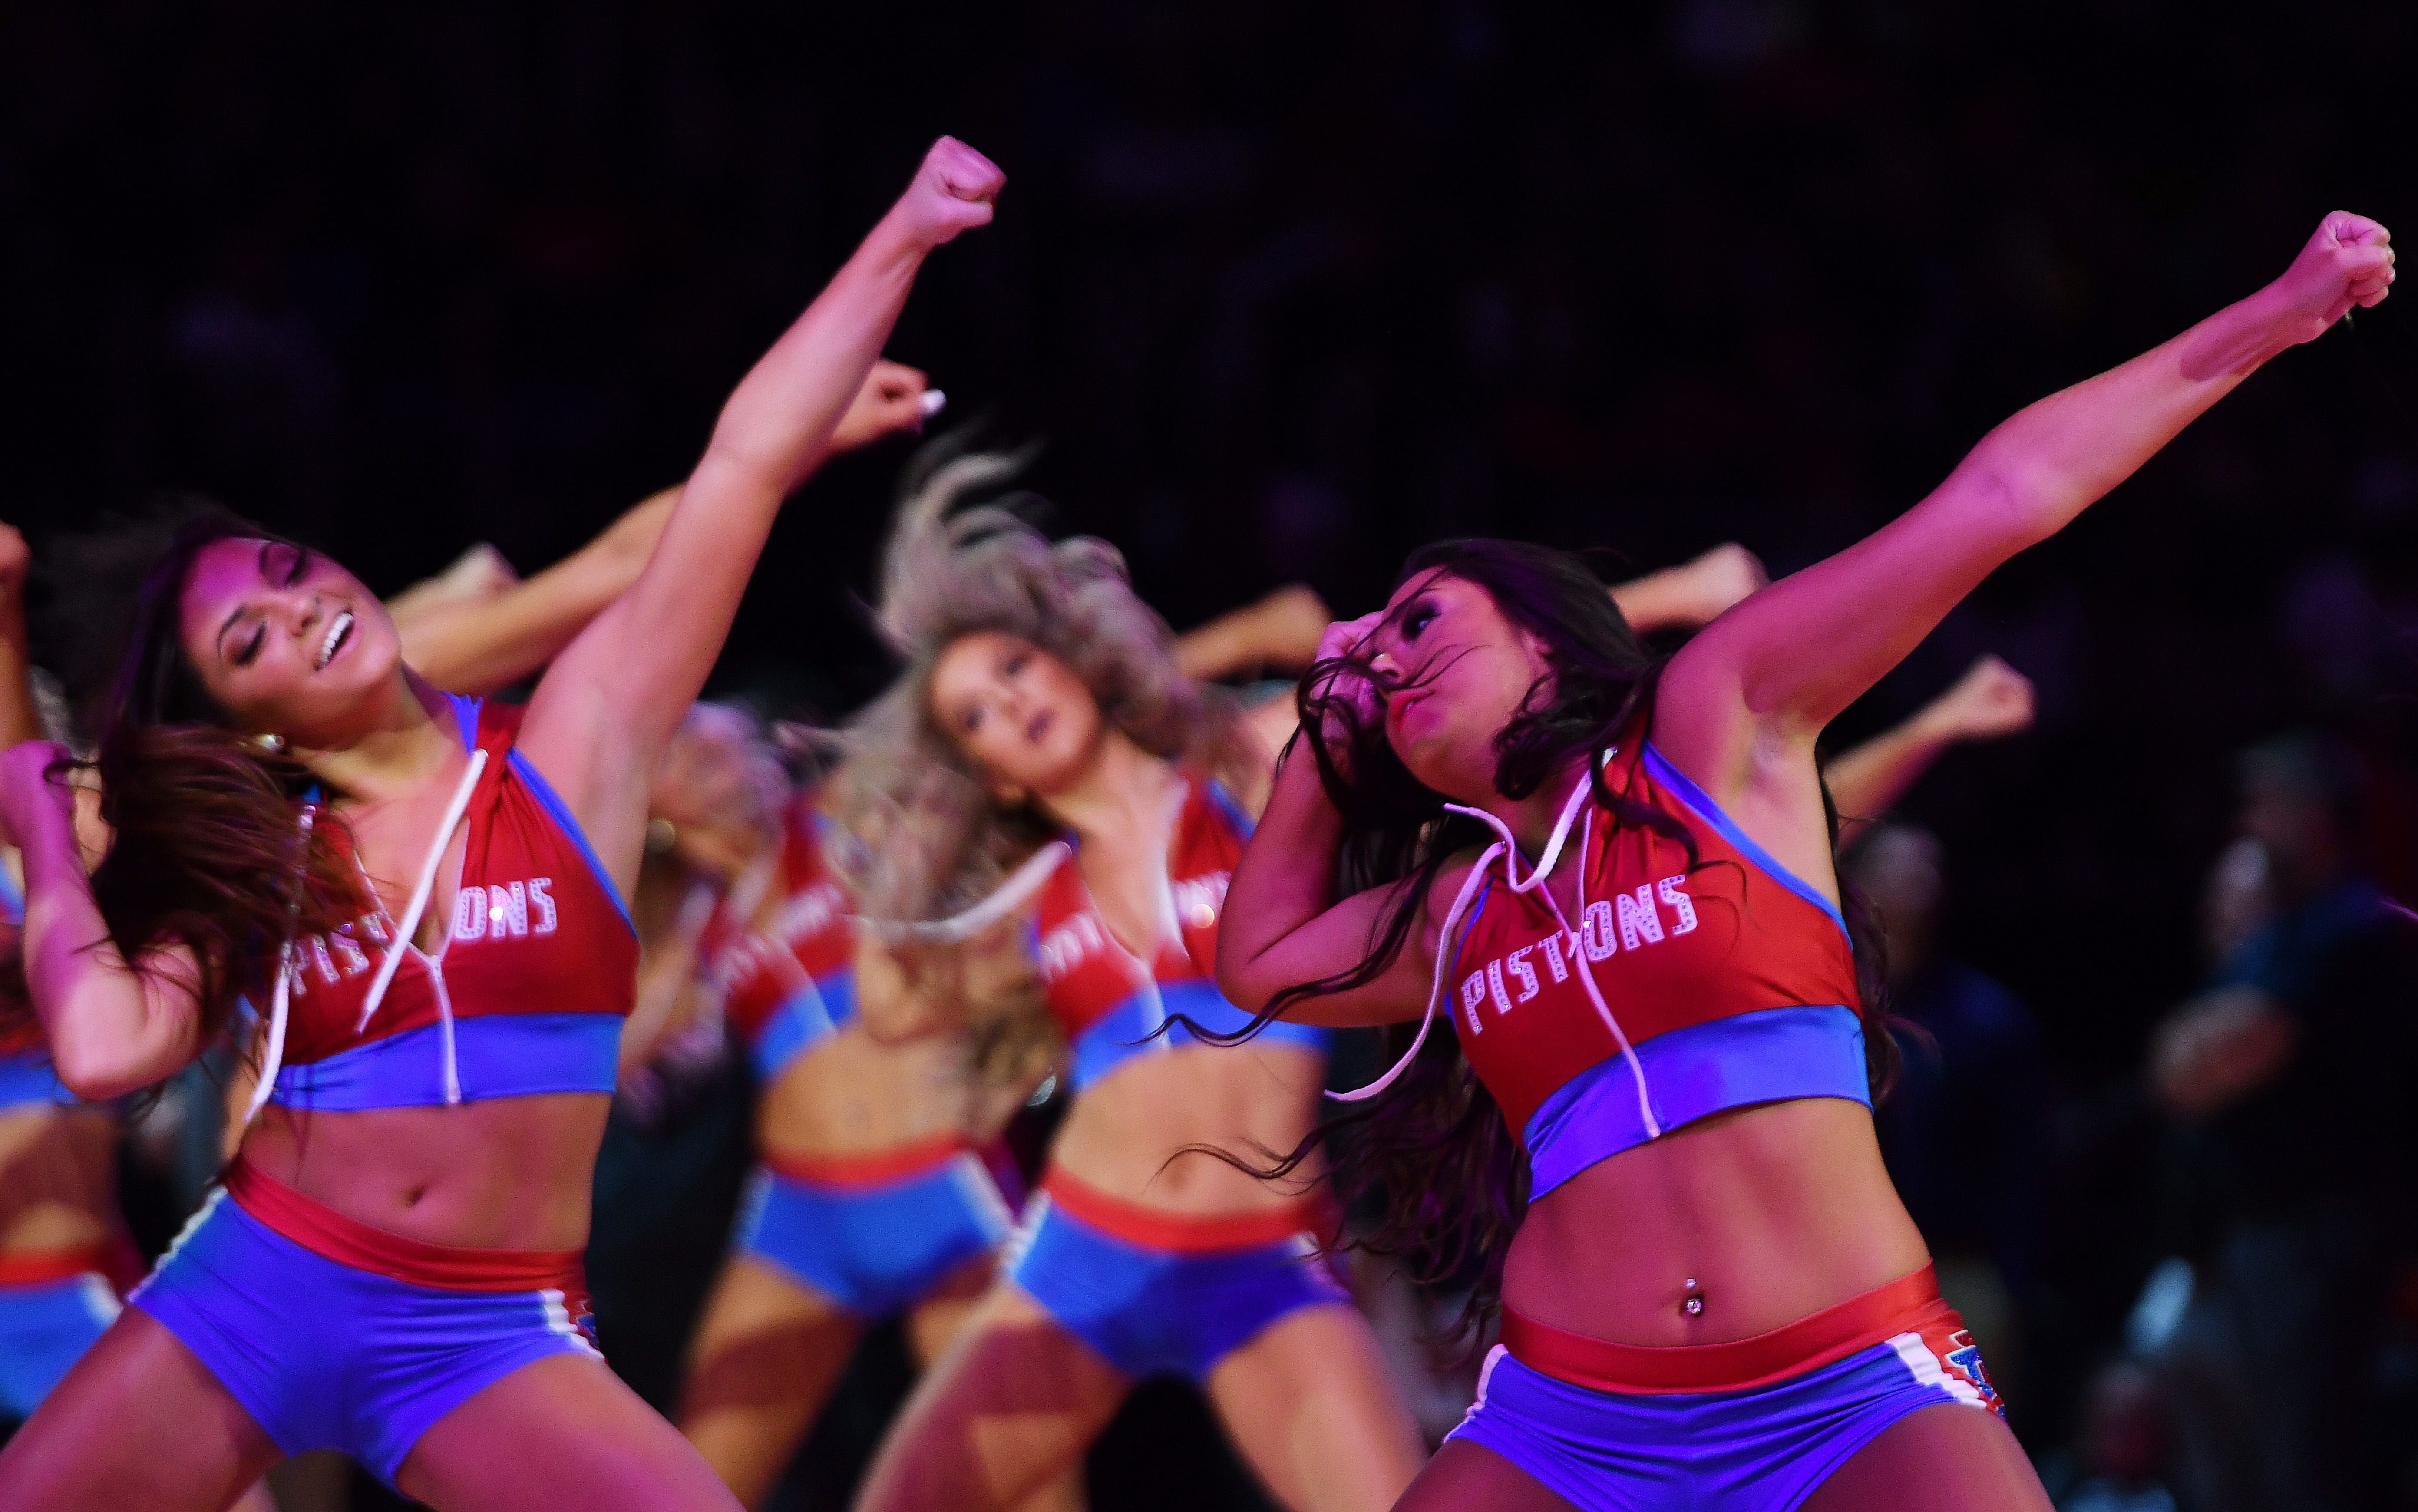 Pistons Dancers performs in the third quarter.